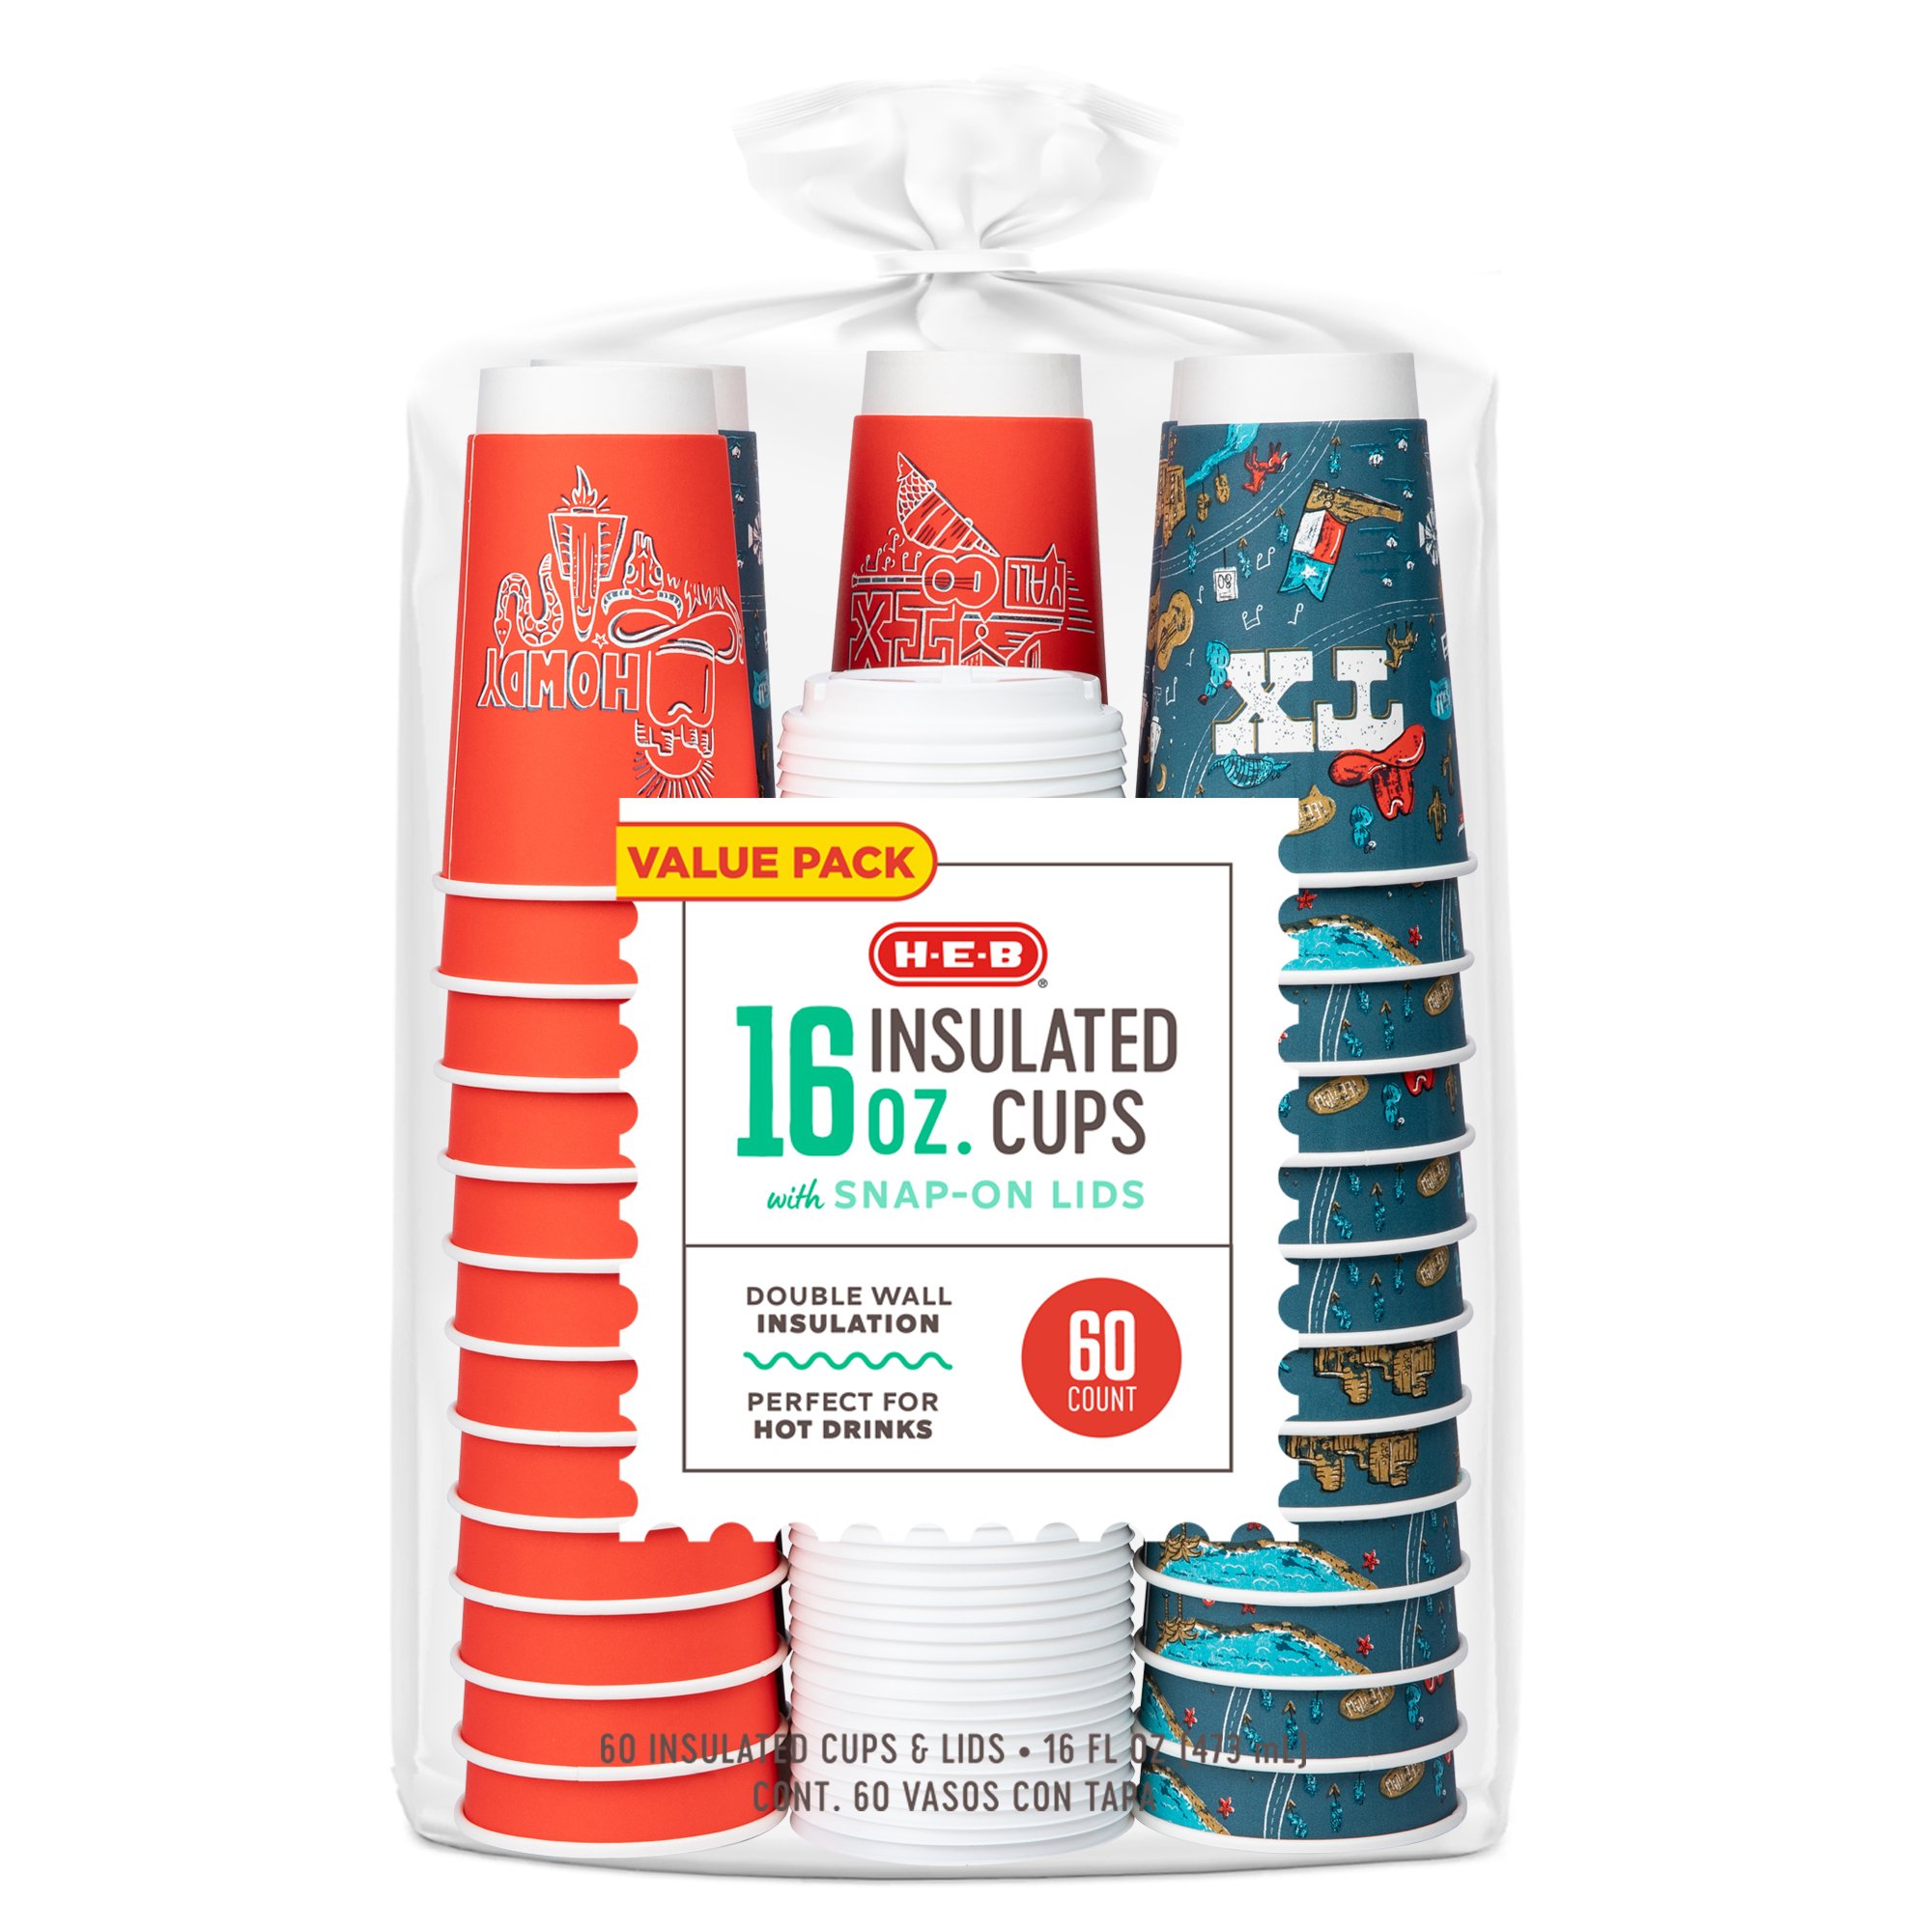 H-E-B Insulated 16 oz Disposable Coffee Cups with Snap-On Lids - Value Pack  - Shop Drinkware at H-E-B